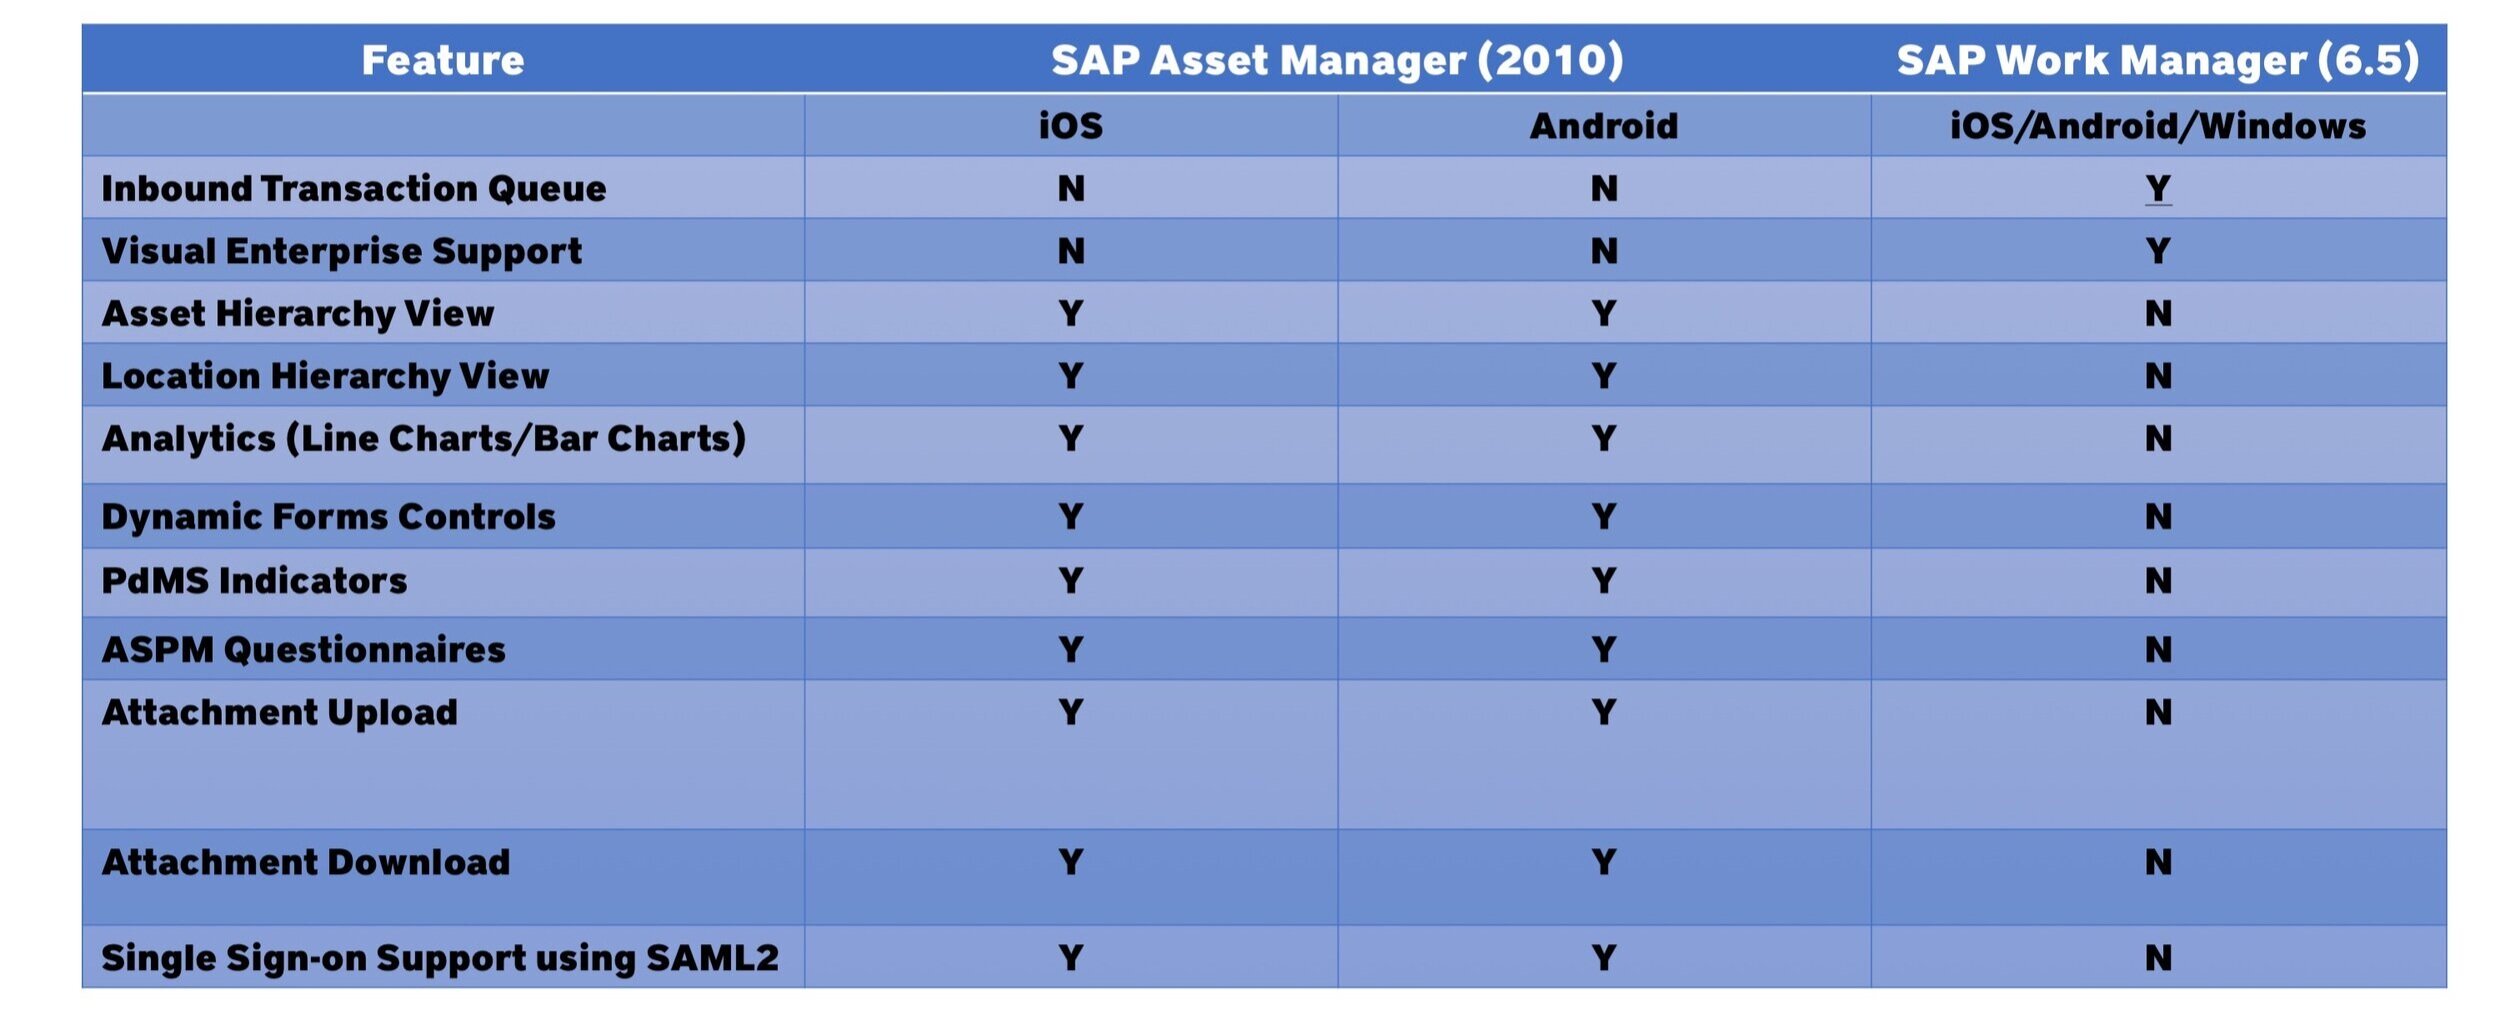 SAP Asset Manager Side by Side Compairison